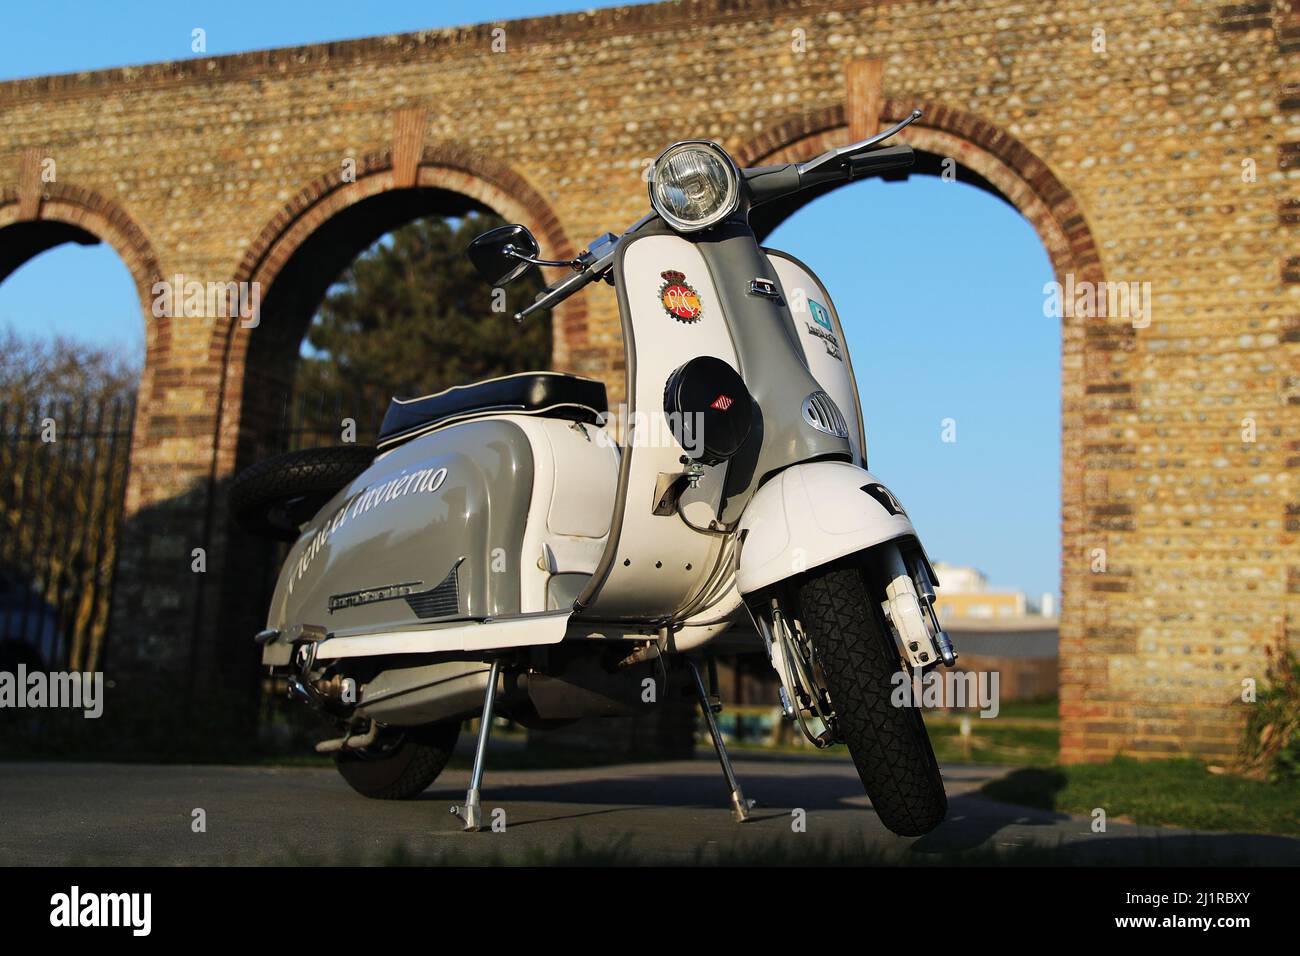 Spanish Lambretta photographed in Worthing, West Sussex, United Kingdom, on the seafront. Stock Photo